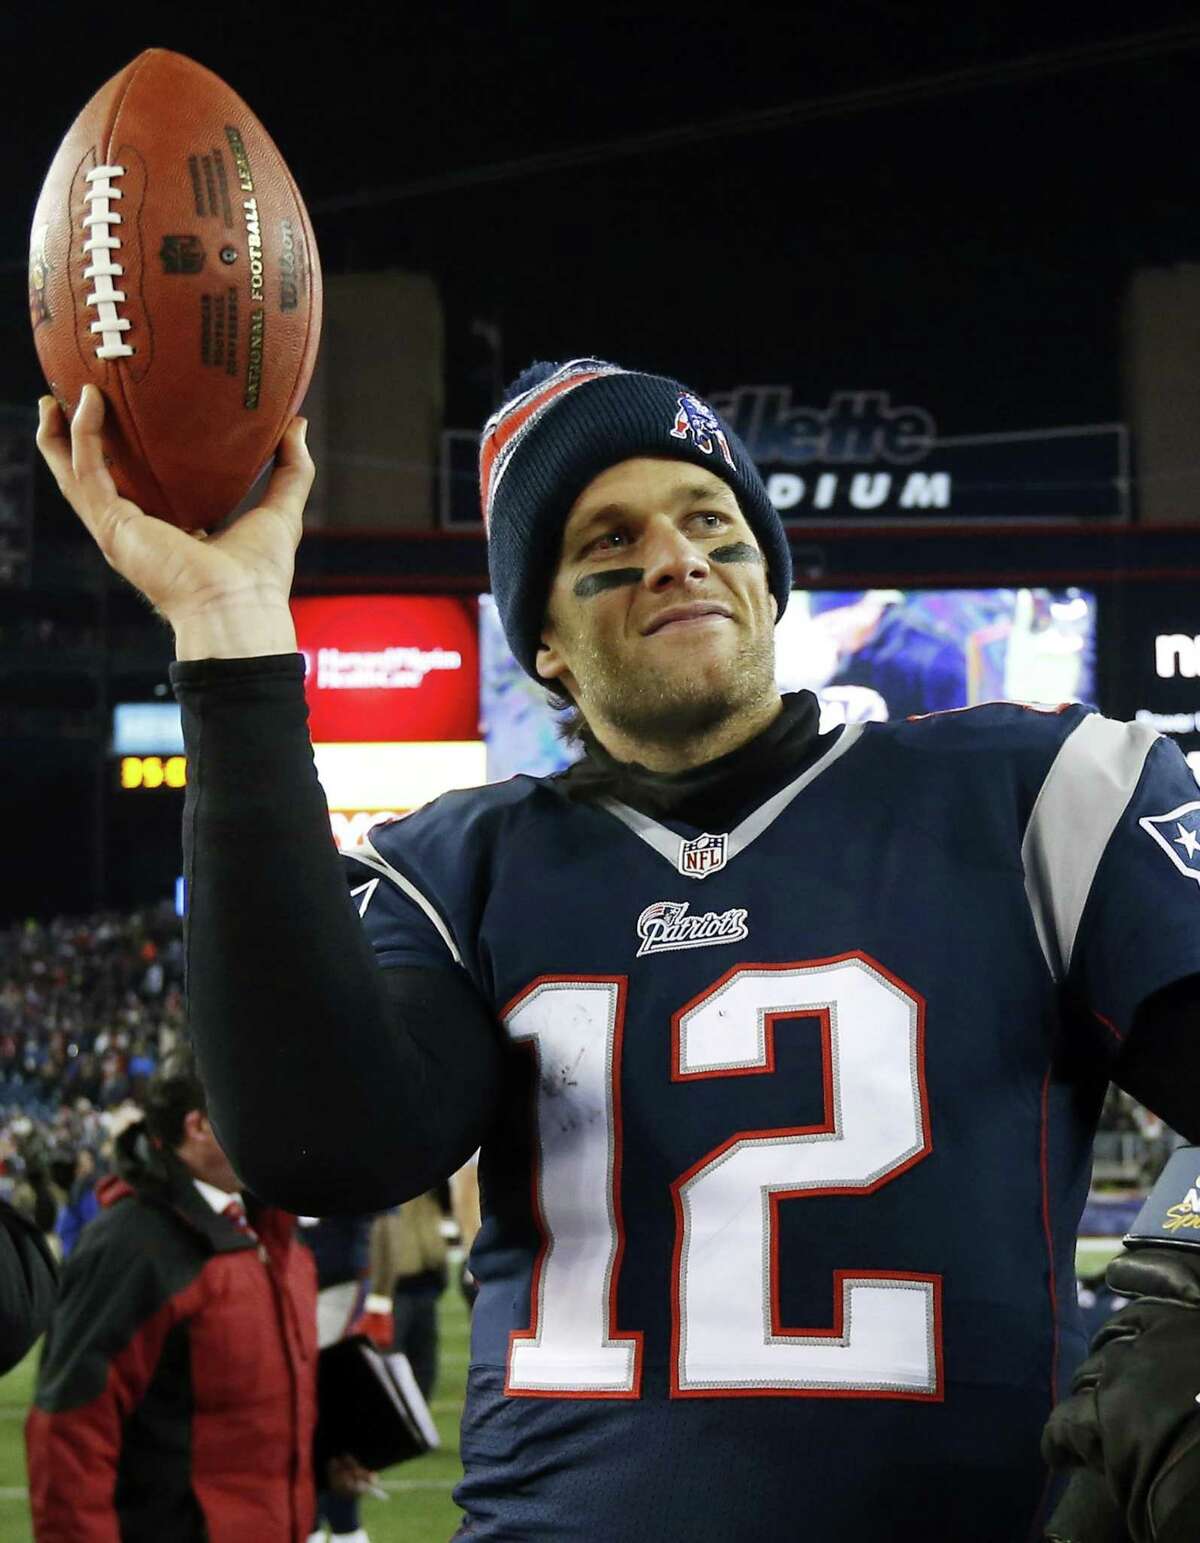 FILE - In this Jan. 10, 2015, file photo, New England Patriots quarterback Tom Brady holds up the game ball after an NFL divisional playoff football game against the Baltimore Ravens in Foxborough, Mass. A federal appeals court has ruled, Monday, April 25, 2016, that New England Patriots Tom Brady must serve a four-game "Deflategate" suspension imposed by the NFL, overturning a lower judge and siding with the league in a battle with the players union. (AP Photo/Elise Amendola, File)